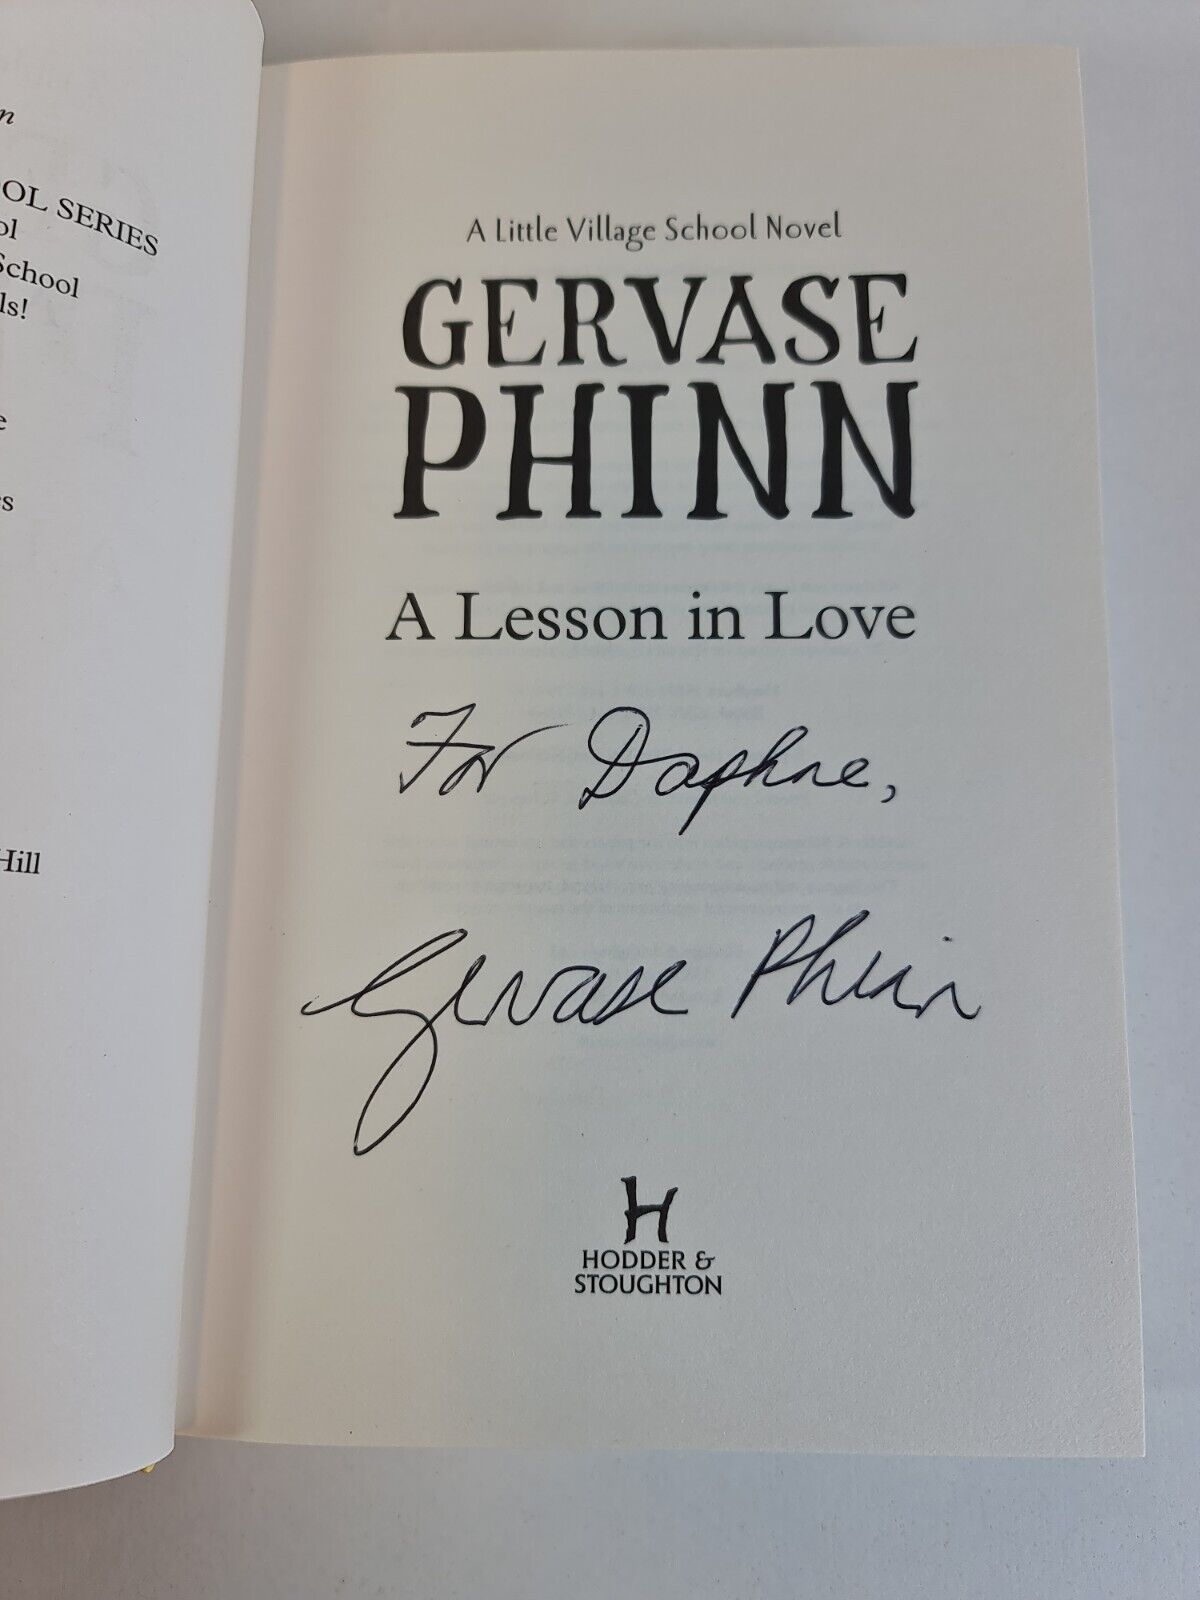 SIGNED A Lesson In Love: A Little Village School Novel by Gervase Phinn